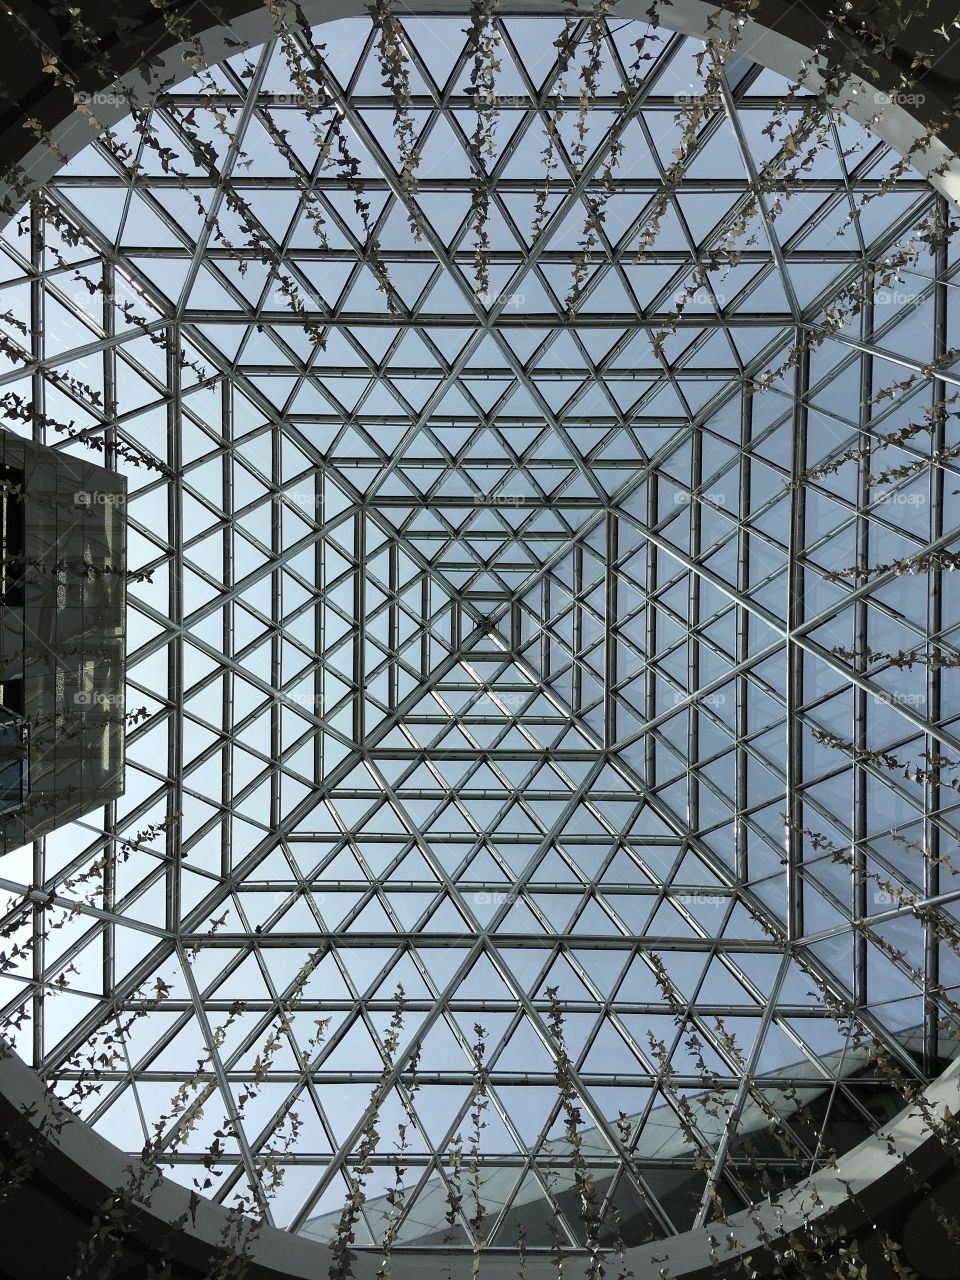 Architecture - looking up at a glass roof at a shopping mall.